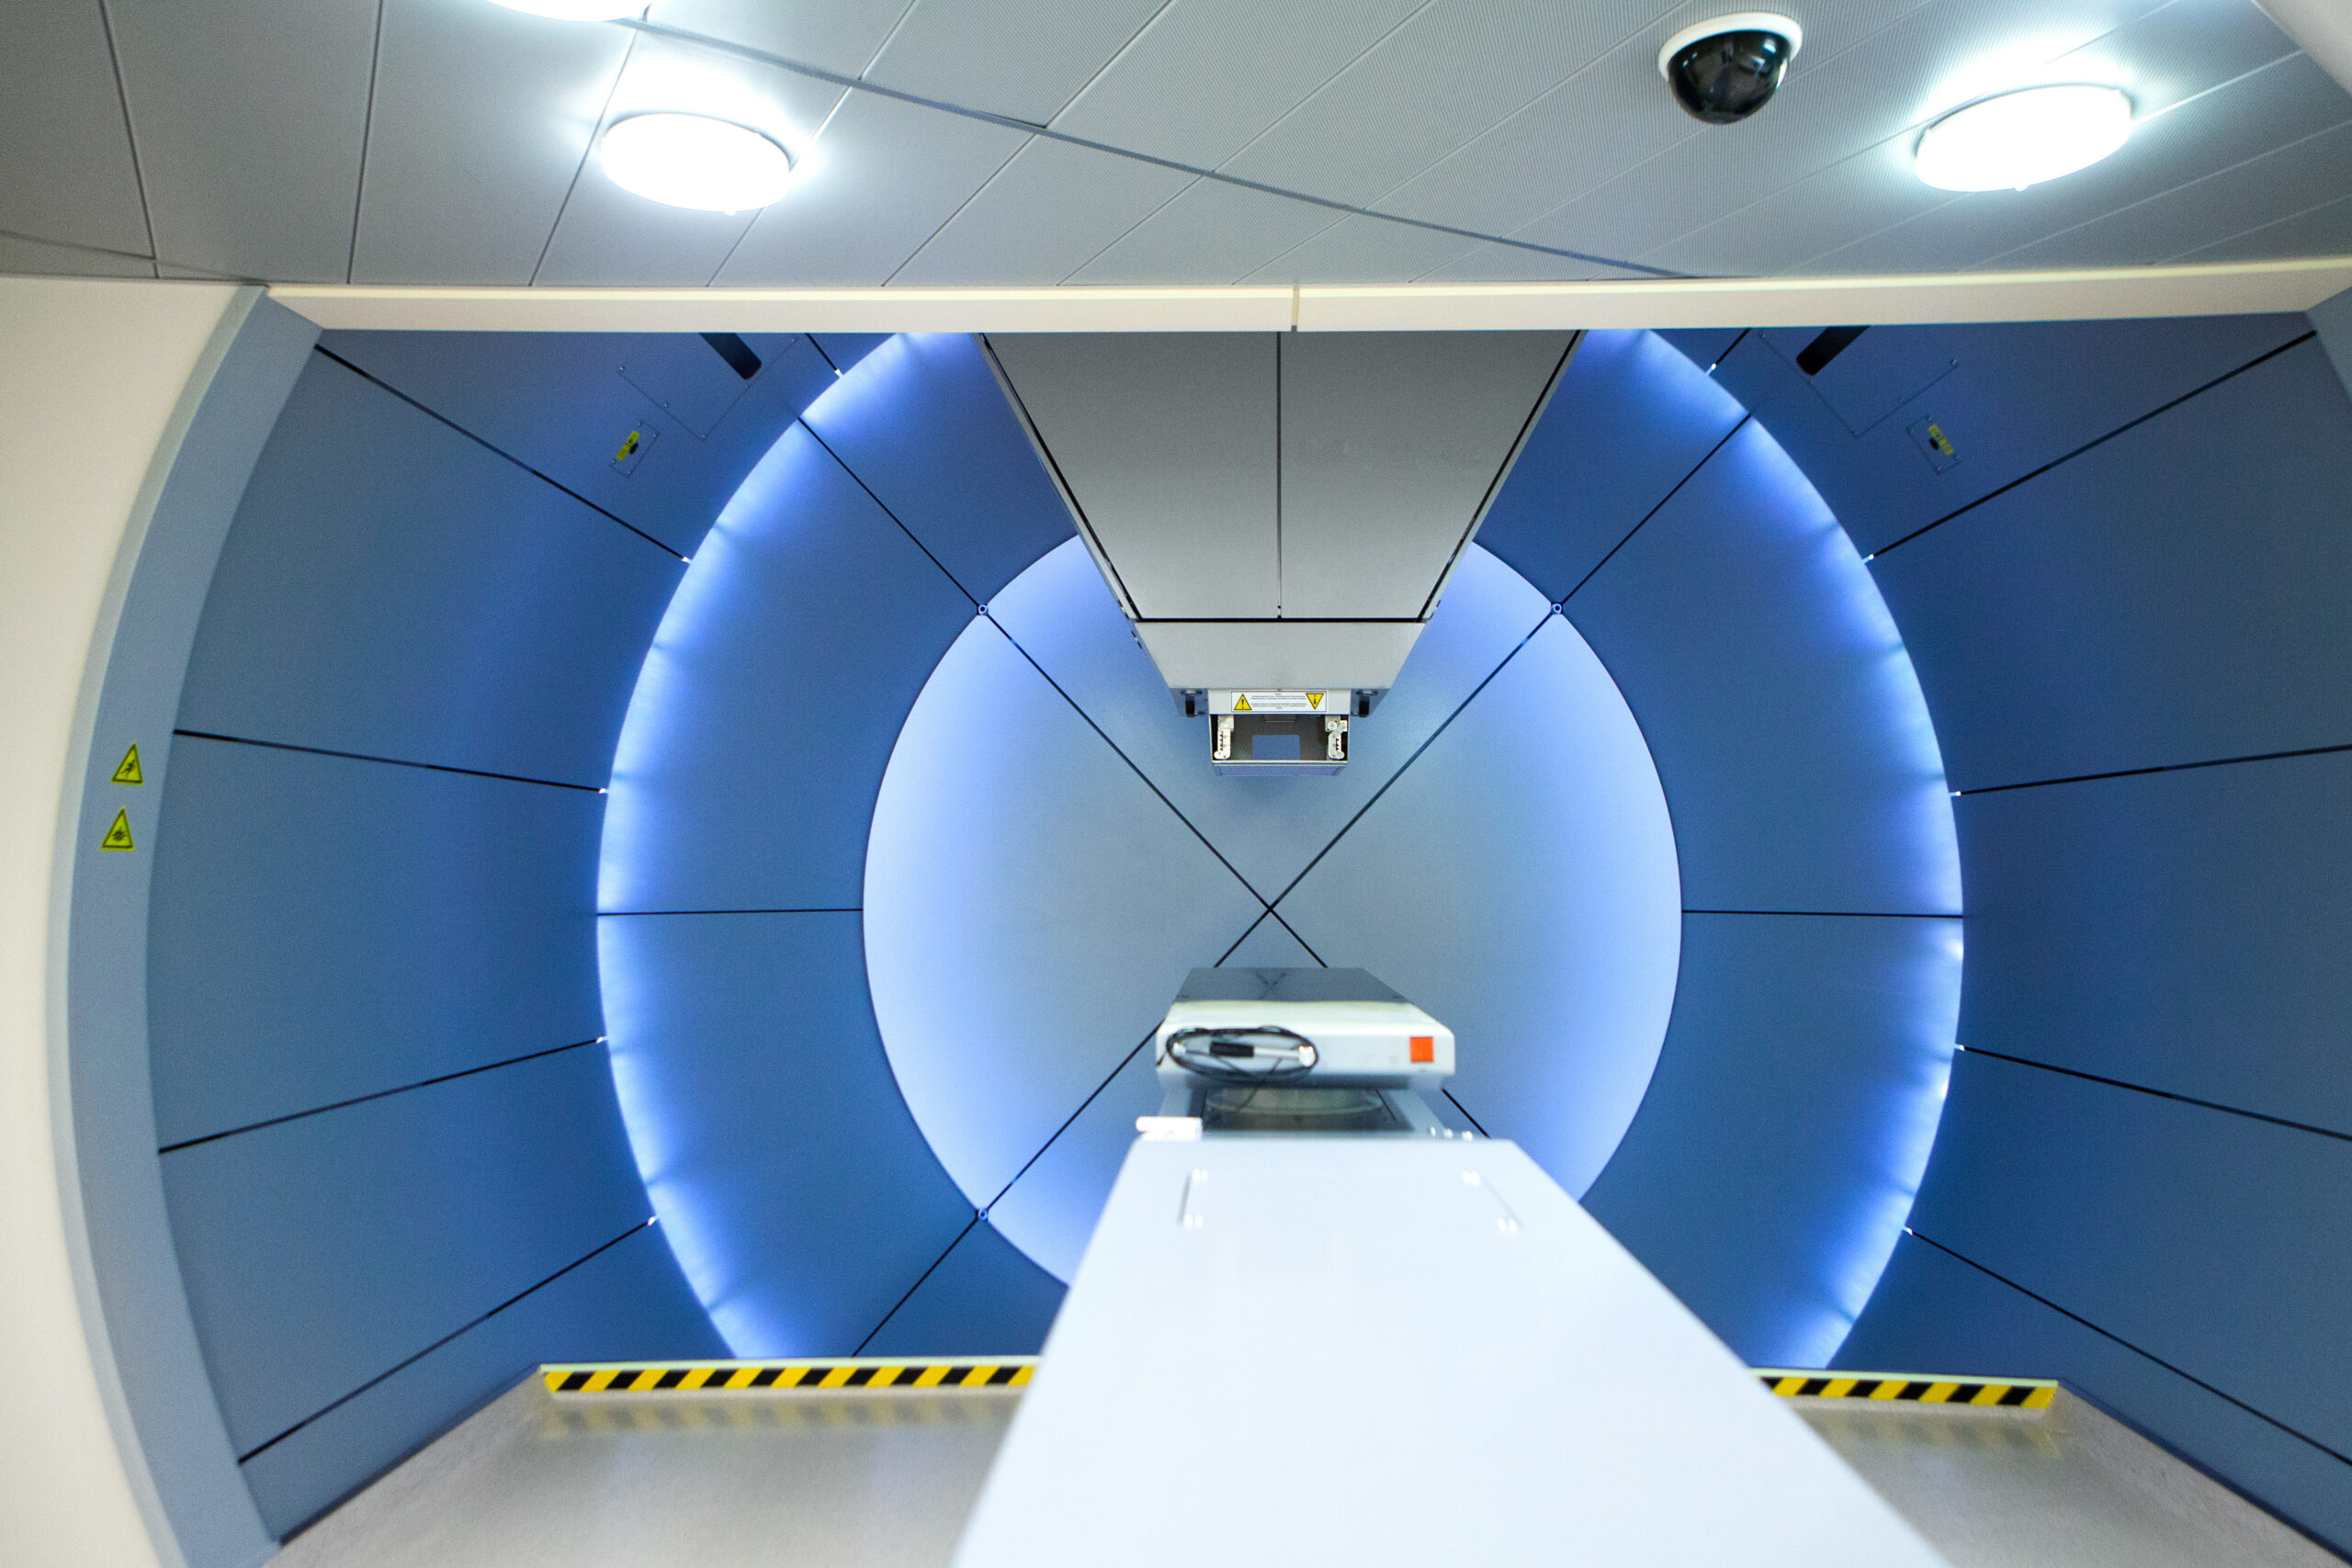 Proton therapy irradiates cancer cells with a beam of protons inside the tumor.